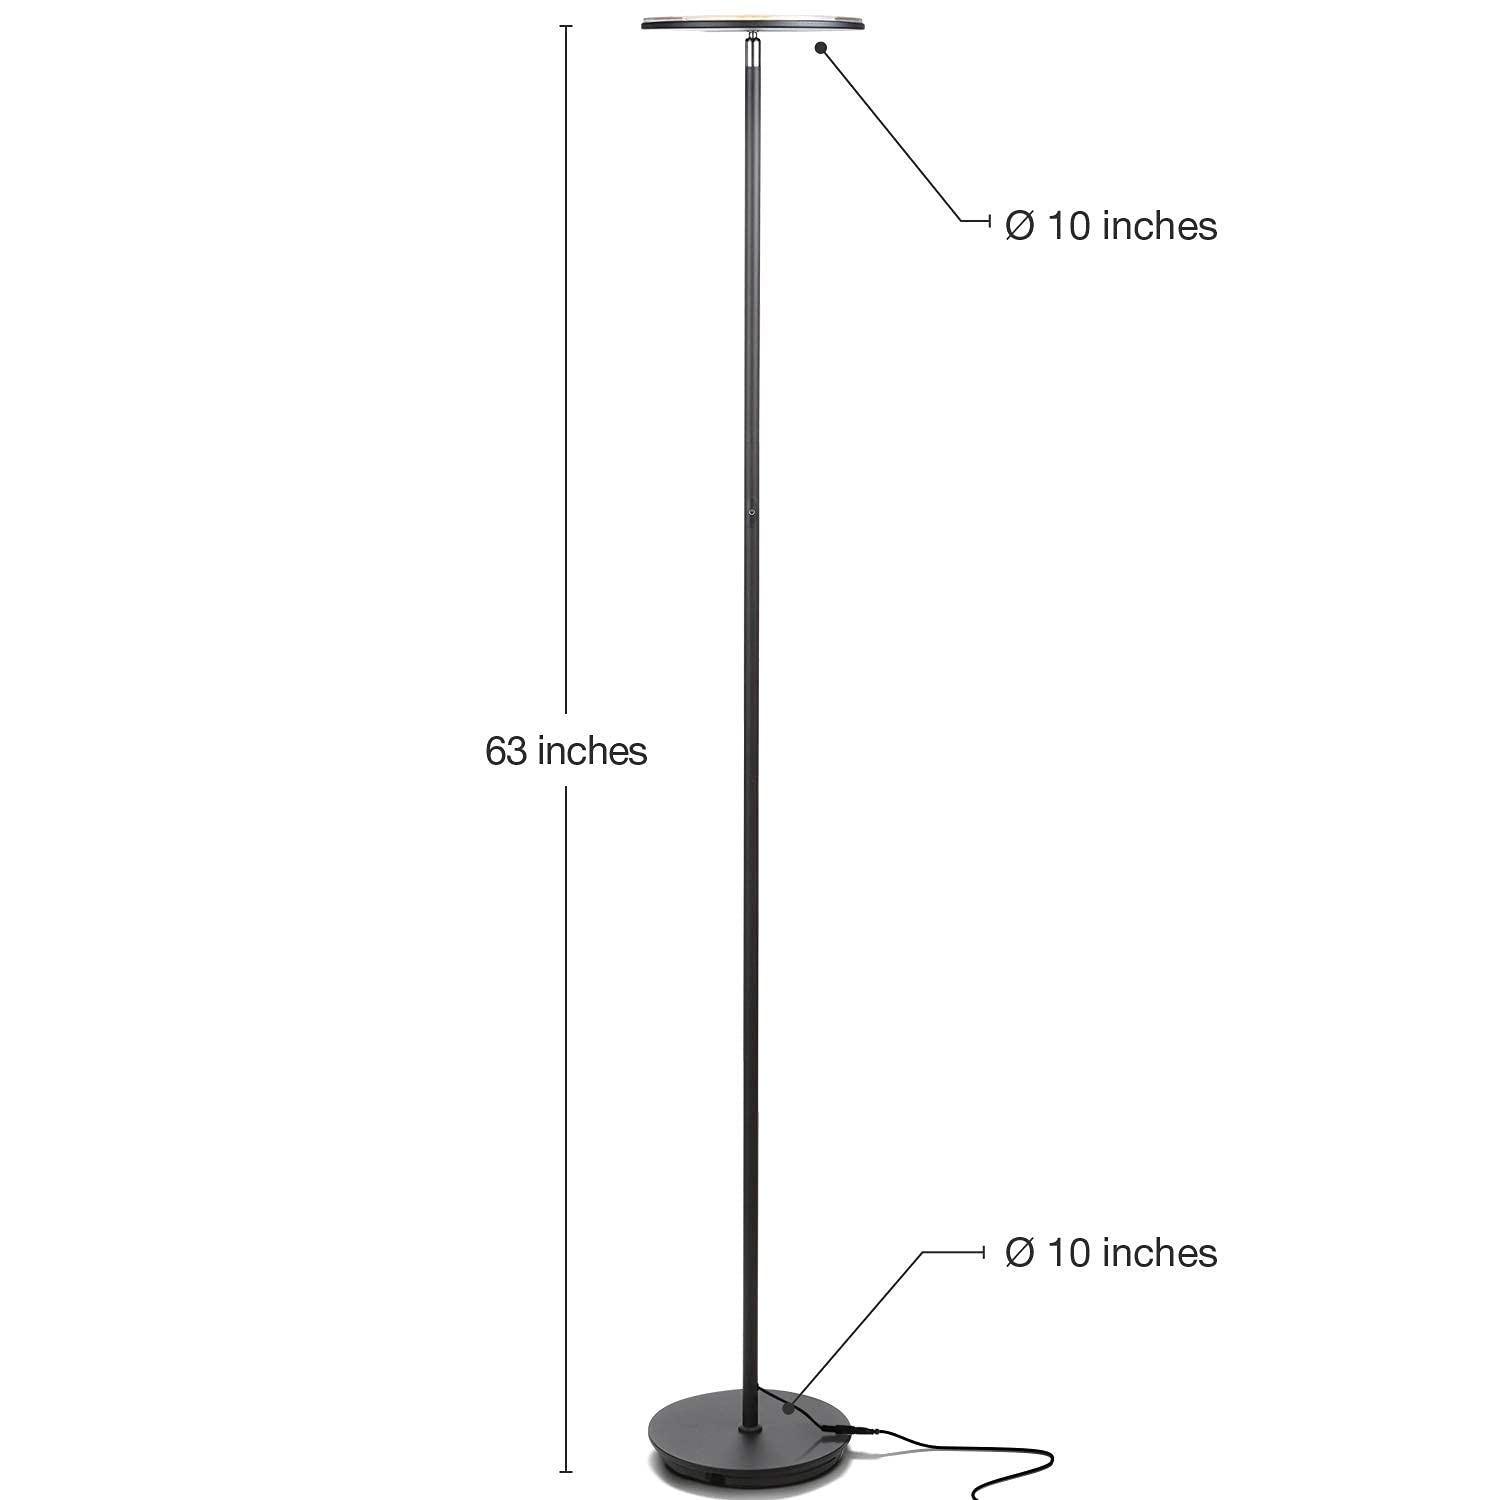 Brightech Sky LED Torchiere Super Bright Floor Lamp - Contemporary, High Lumen Light for Living Rooms & Offices - Dimmable, Indoor Pole Uplight for Bedroom Reading - Black